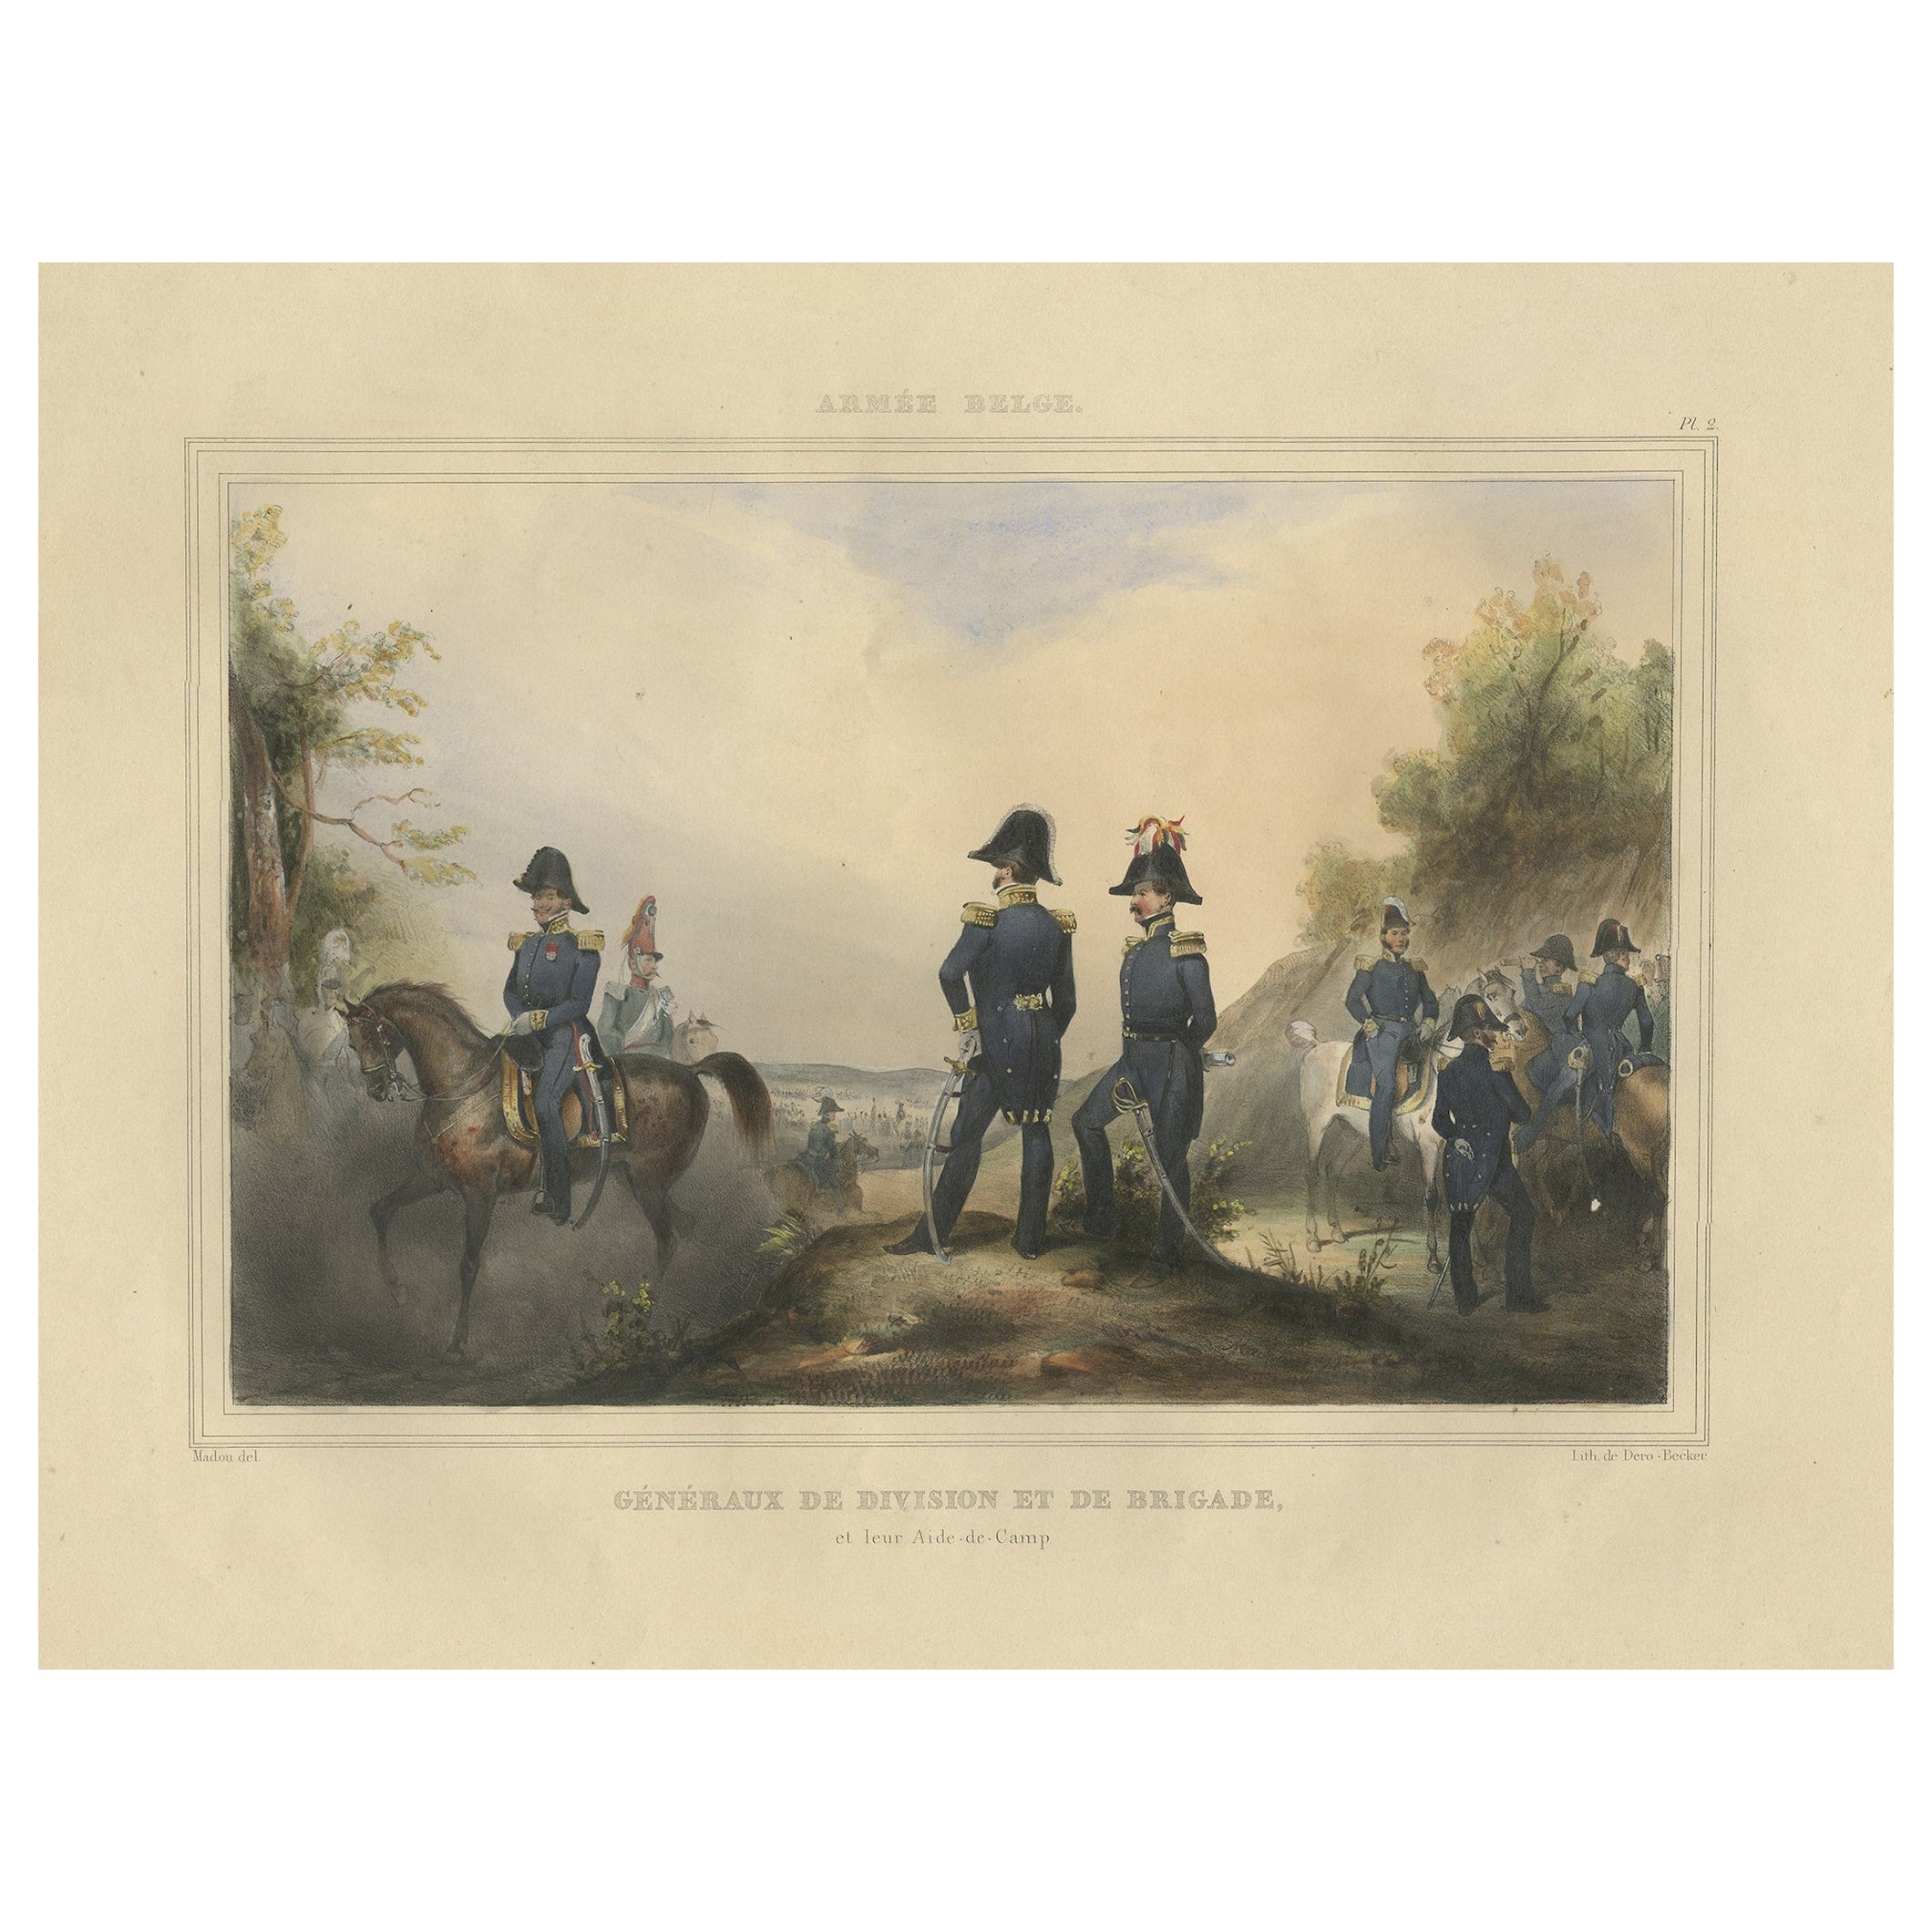 Decorative Antique Print of Fully Uniformed Generals of the Belgium Army, 1833